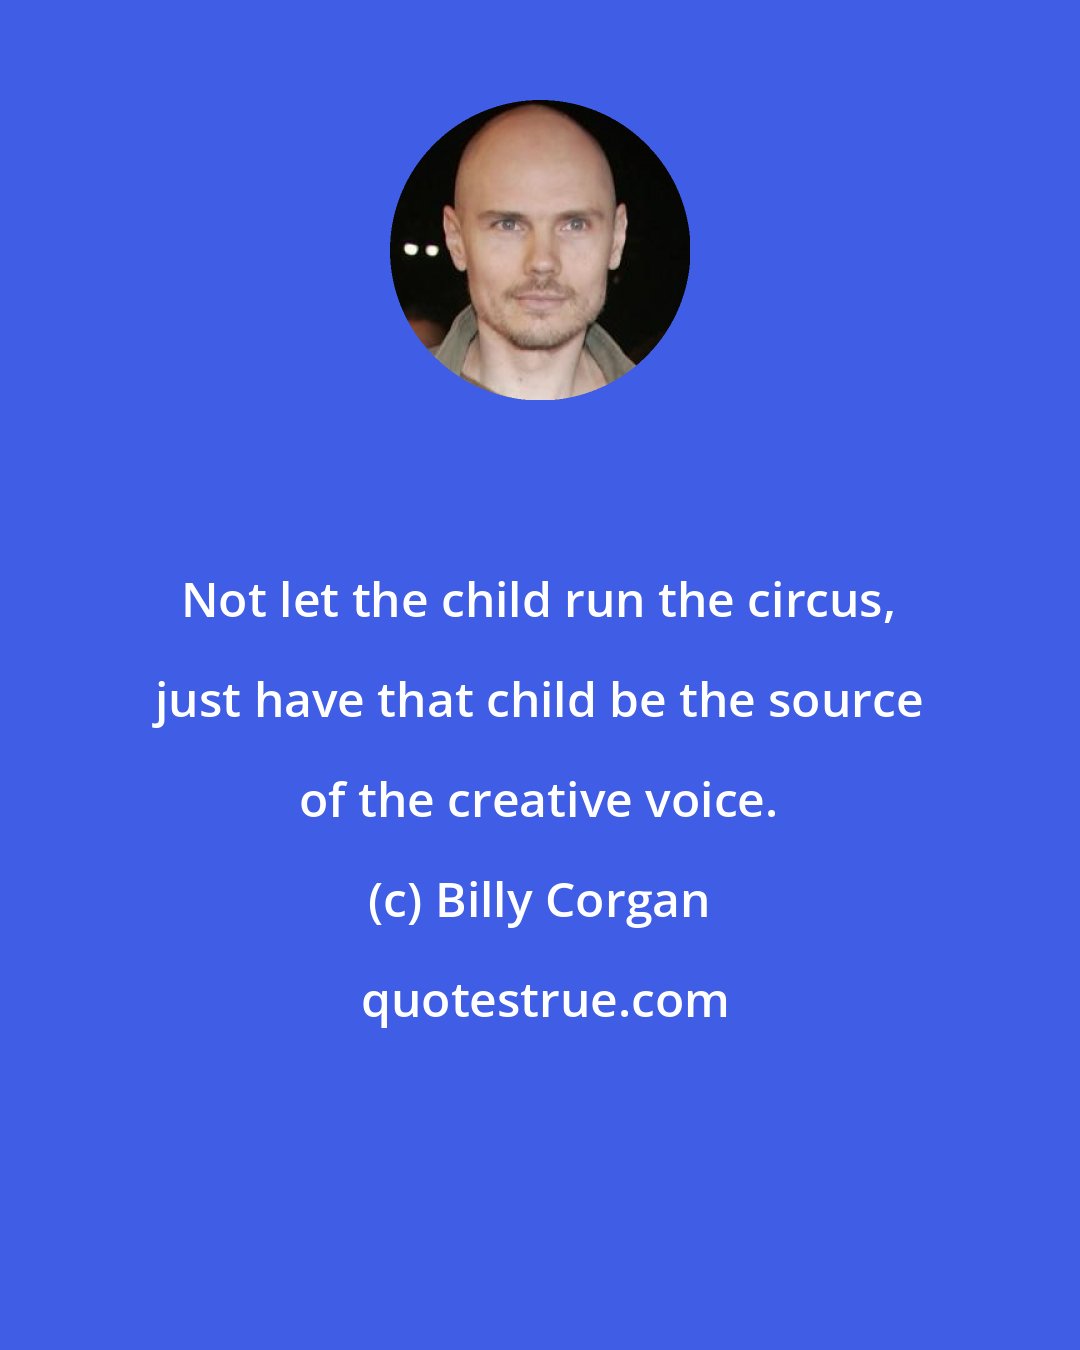 Billy Corgan: Not let the child run the circus, just have that child be the source of the creative voice.